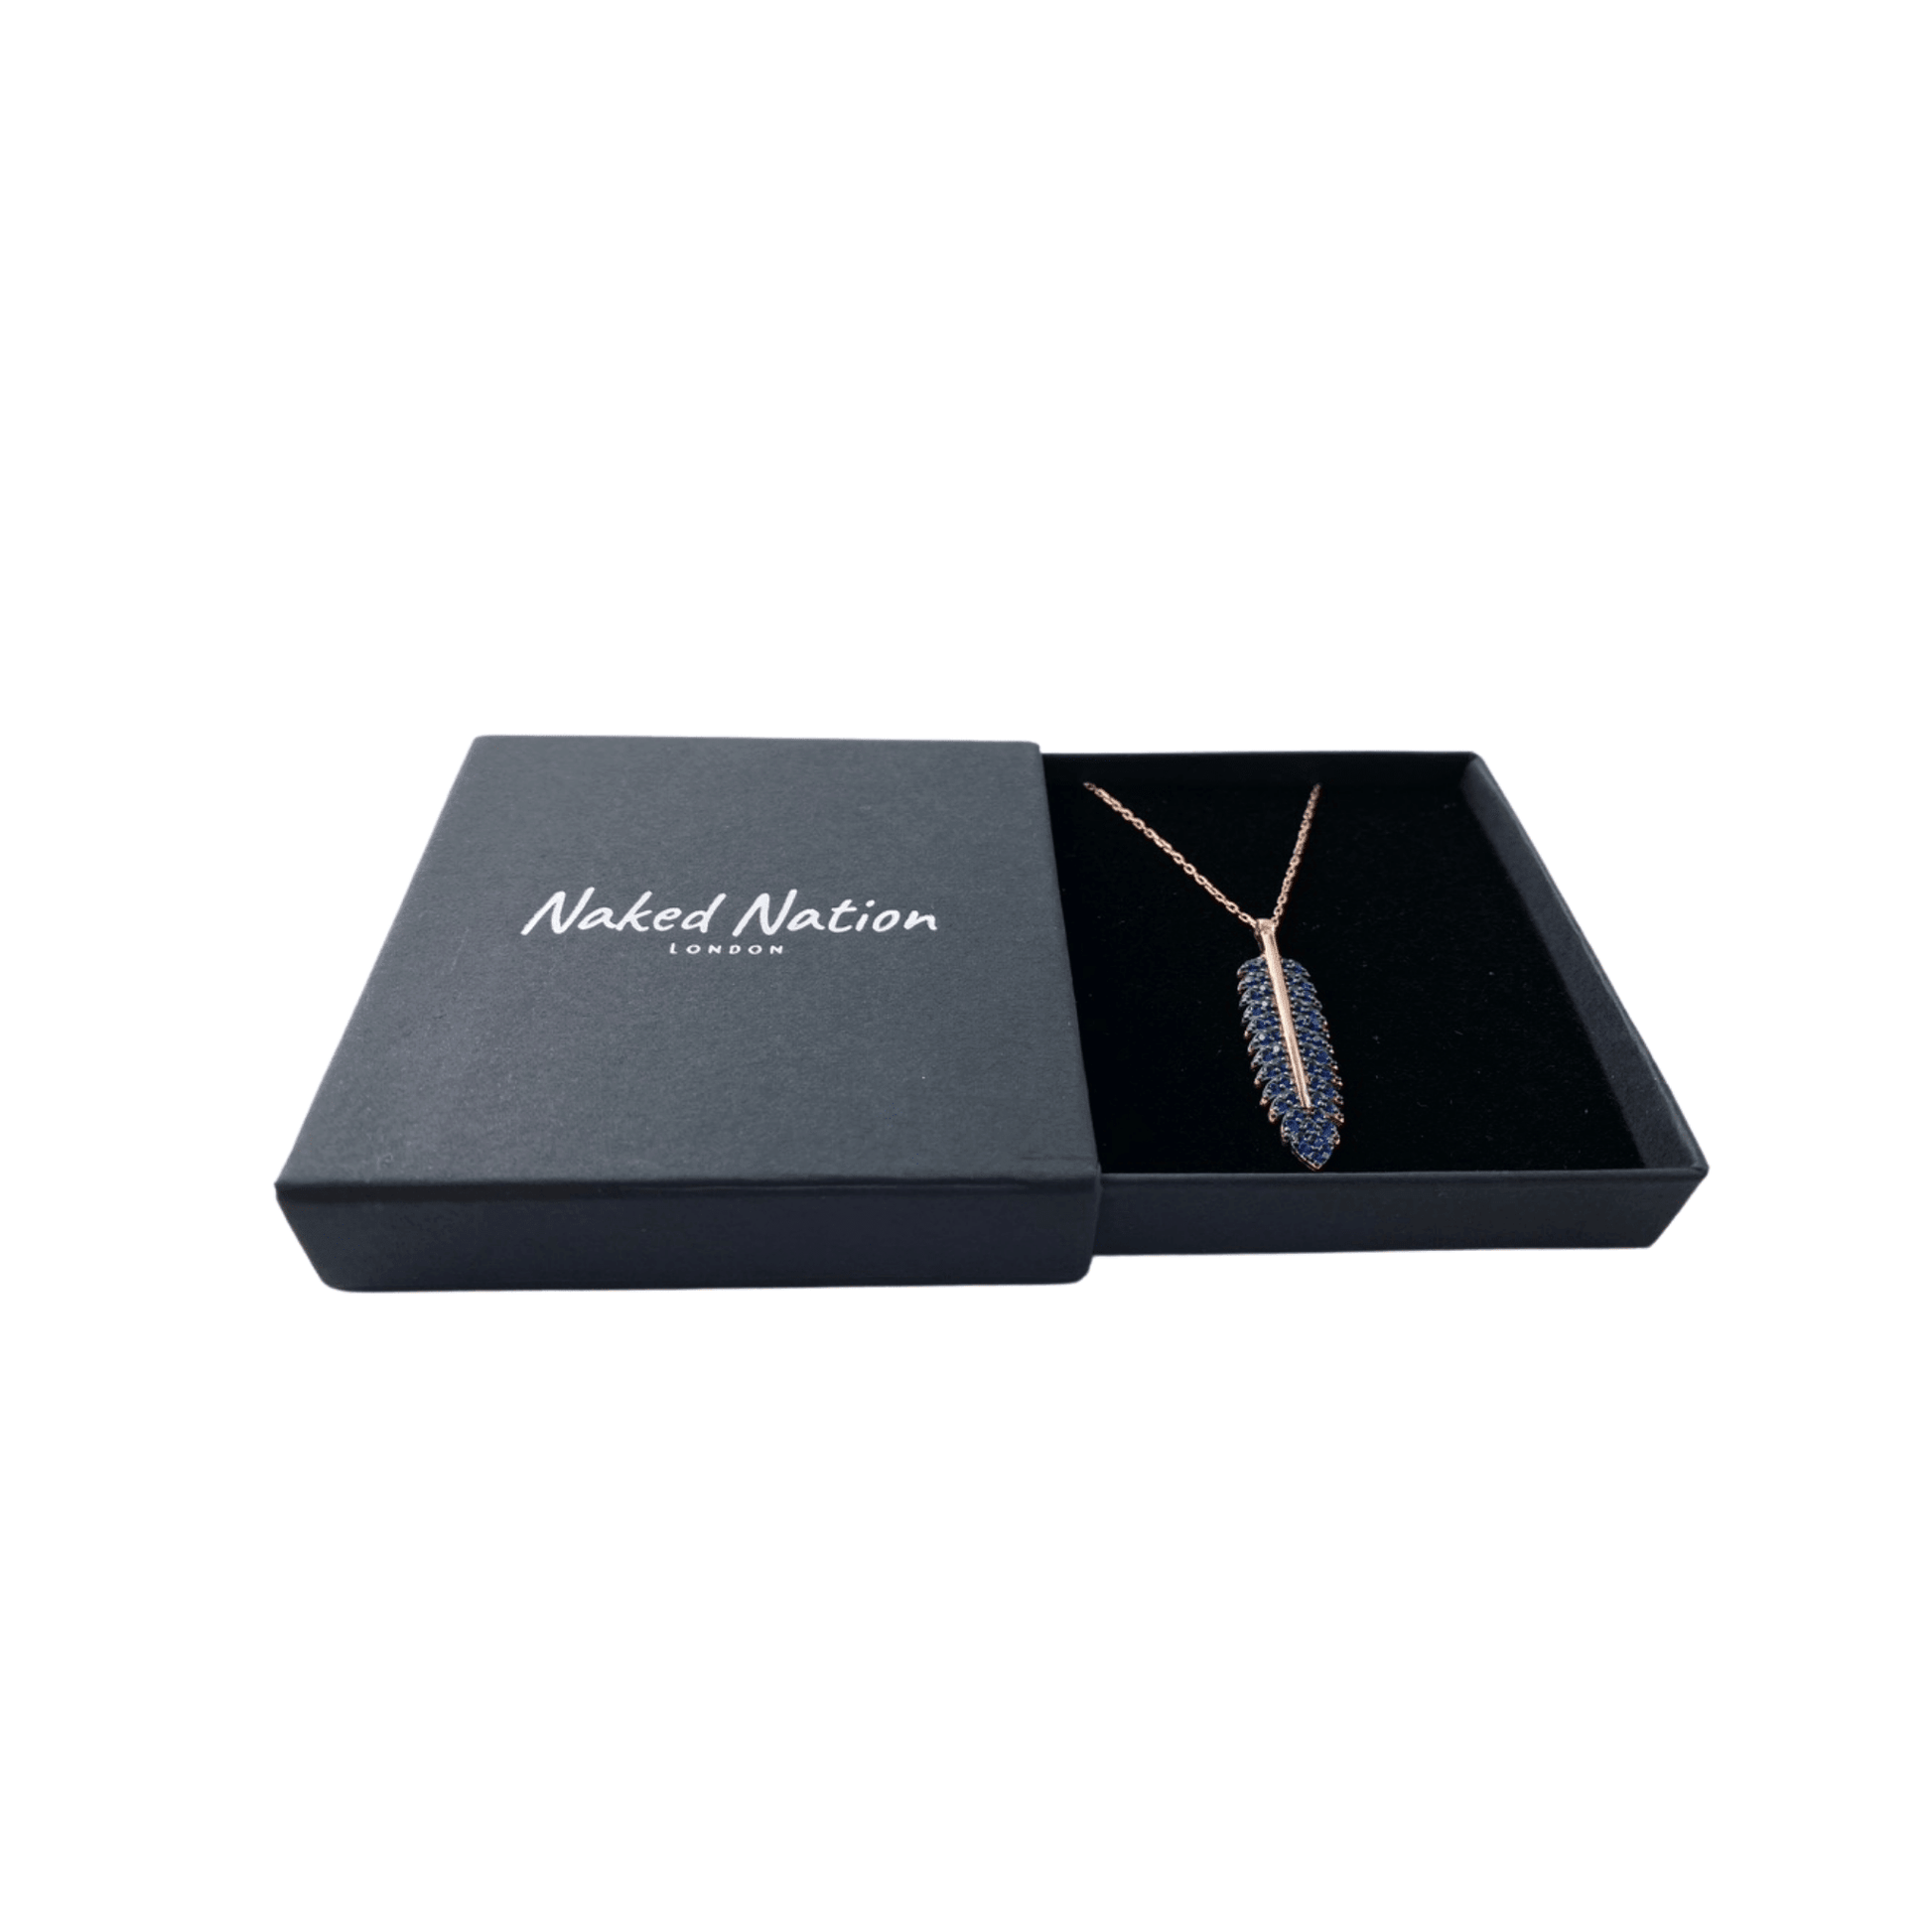 Cubic Zirconia Leaf, 925 Sterling Silver Necklace. Leaf as a Symbol of Fertility and Growth - Naked Nation UK